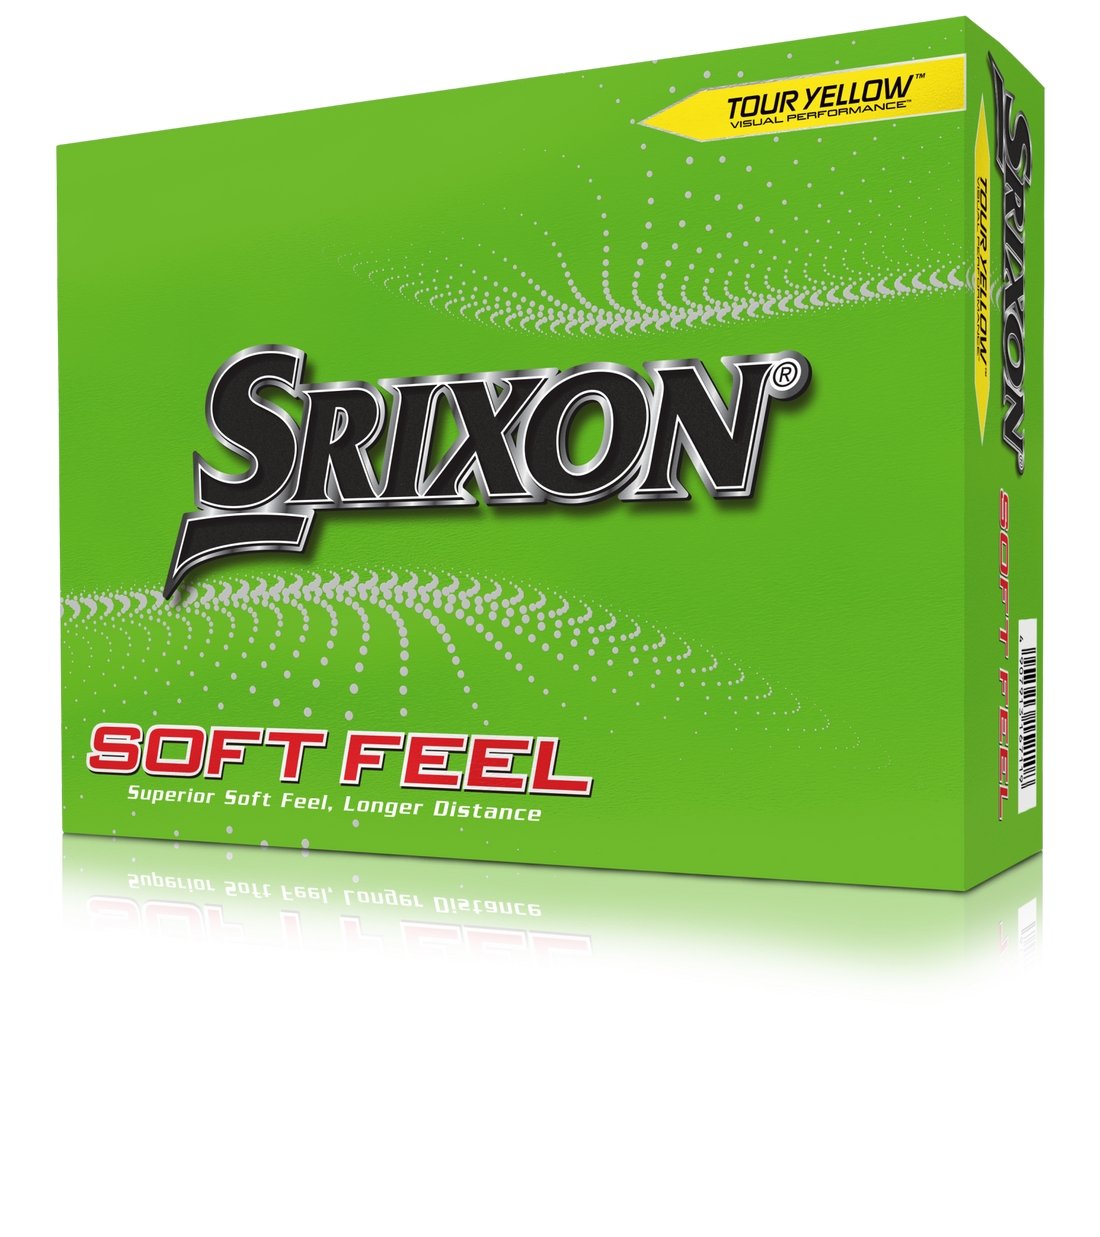 Srixon Soft Feel Golf Balls (Buy One, Get One Free At Checkout)